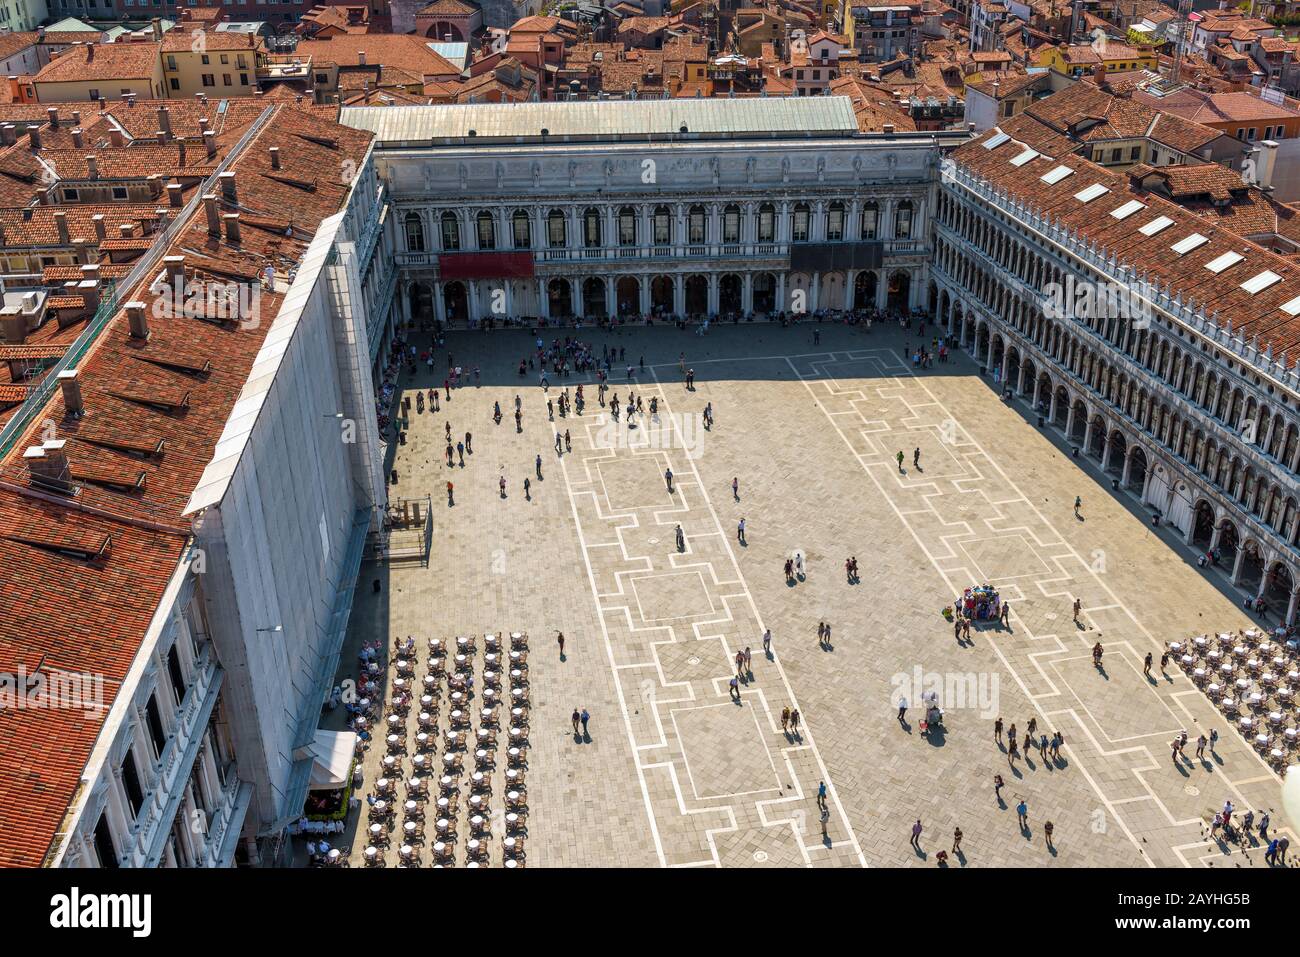 Piazza San Marco, or St Mark`s Square, in Venice, Italy. This is the main square of Venice. Stock Photo